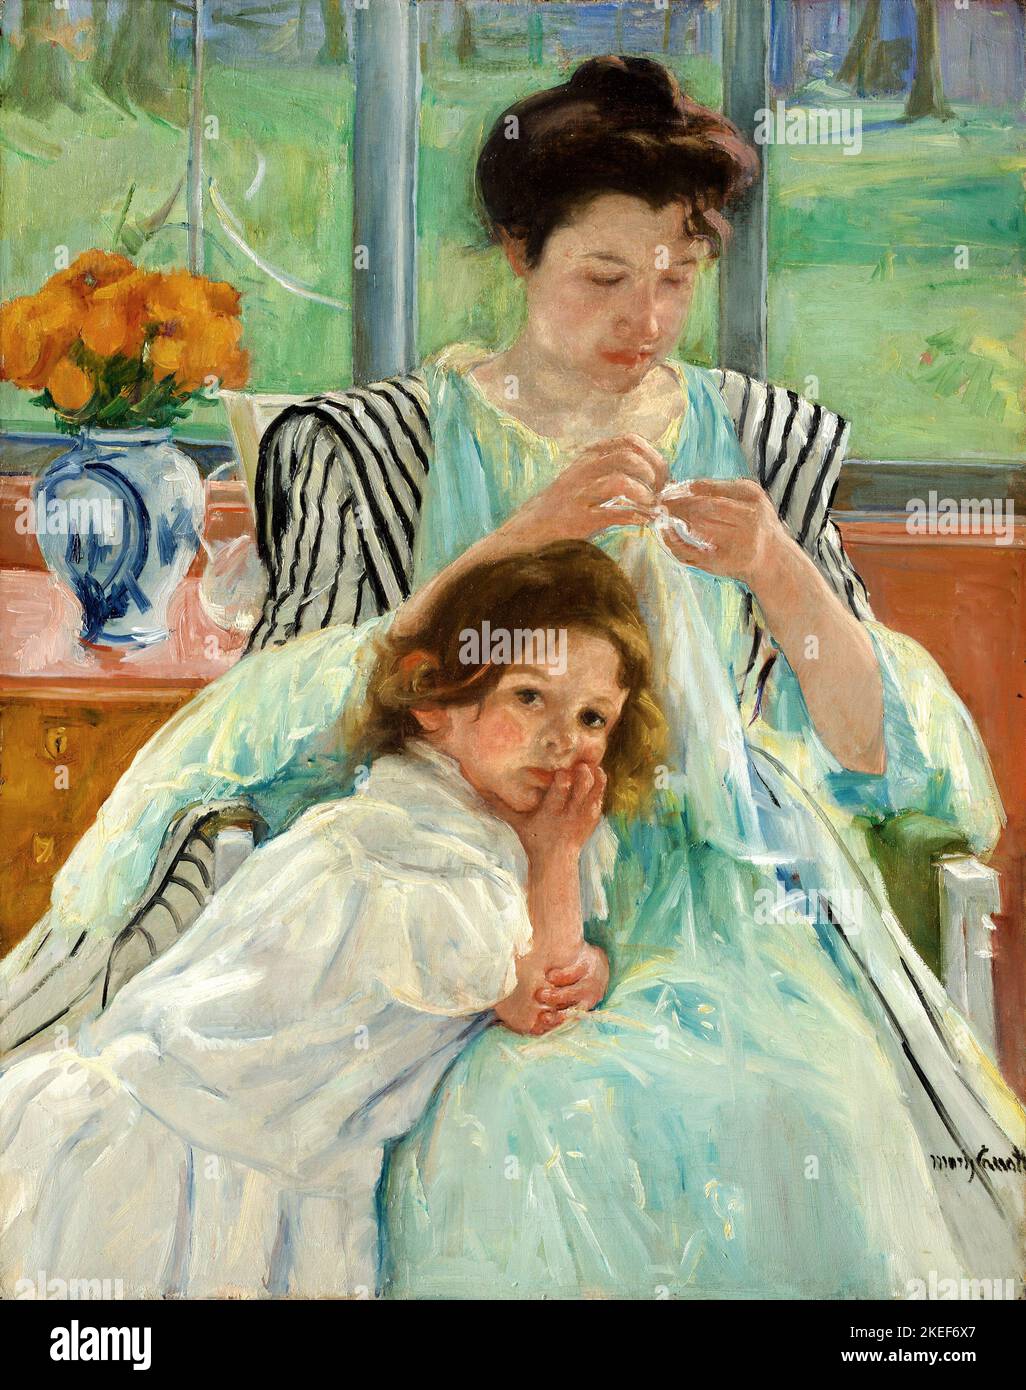 Mary Cassatt, Young Mother Sewing, 1900, Oil on Canvas, National Gallery of Art, Washington, D.C., USA. Foto Stock